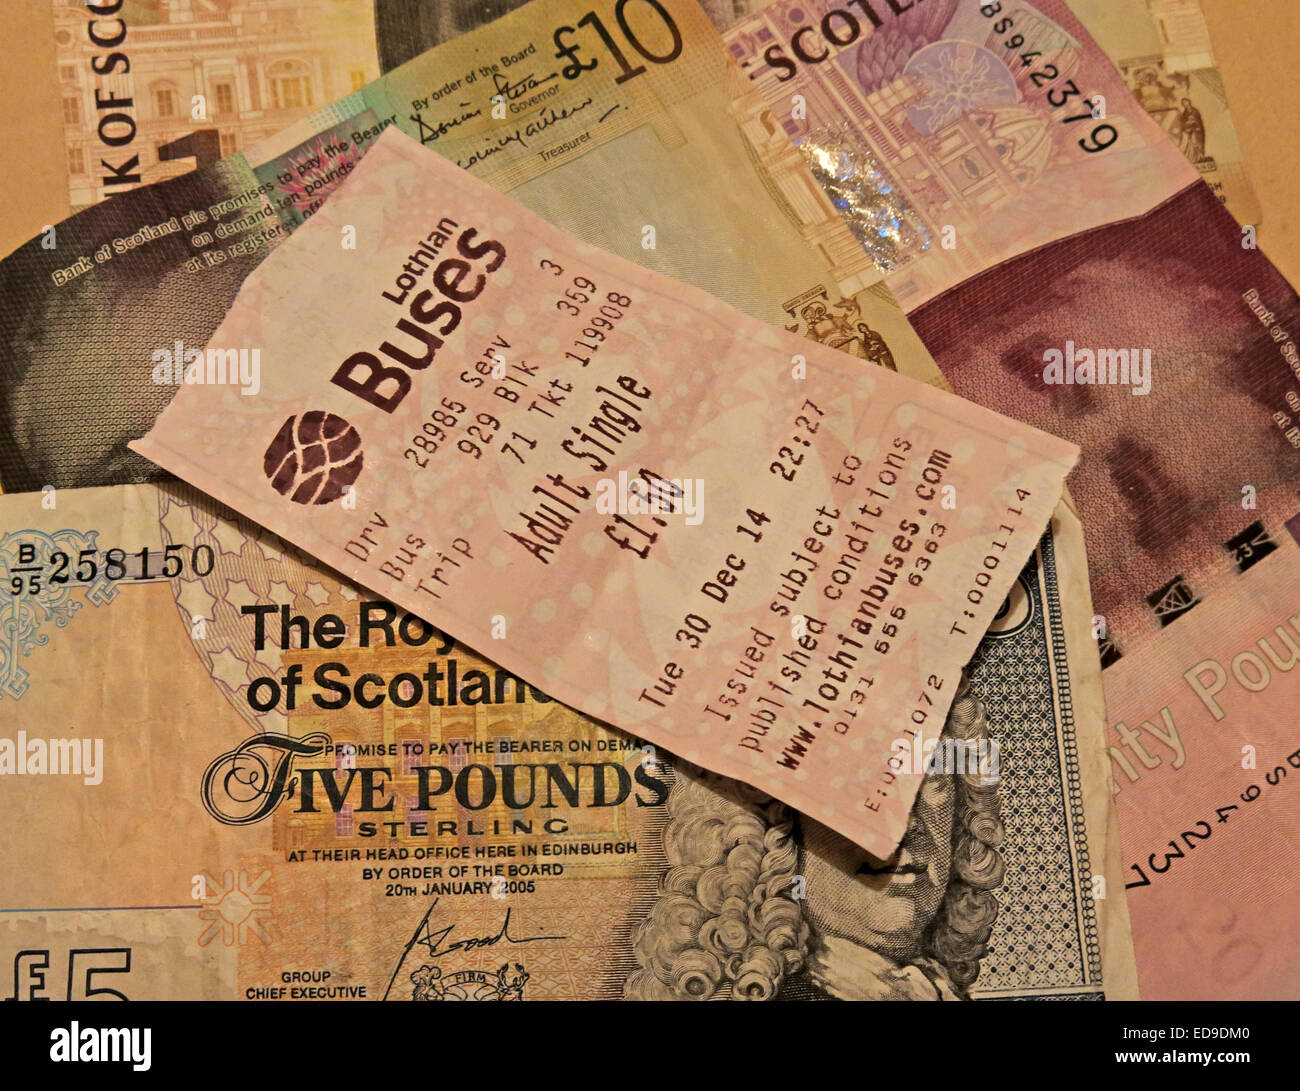 Lothian Buses bus Ticket and Scots banknotes from Edinburgh, Scotland, UK sideways Stock Photo